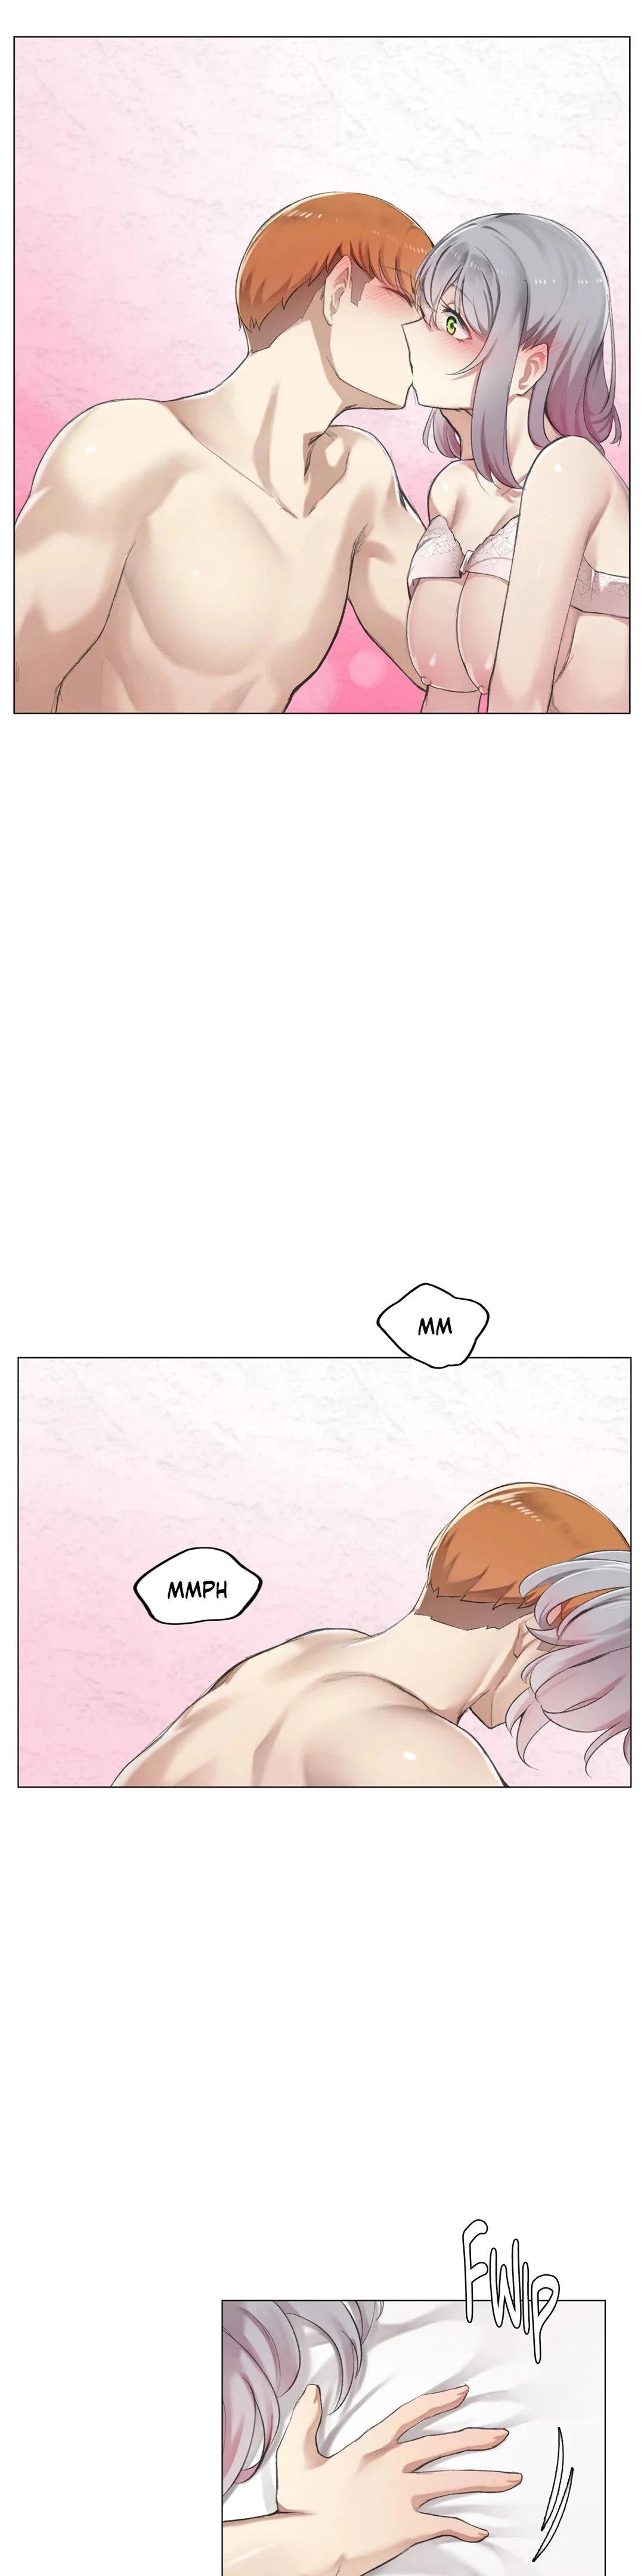 [Dumangoon, KONG_] Sexcape Room: Snap Off Ch.7/7 [English] [Manhwa PDF] Completed 192